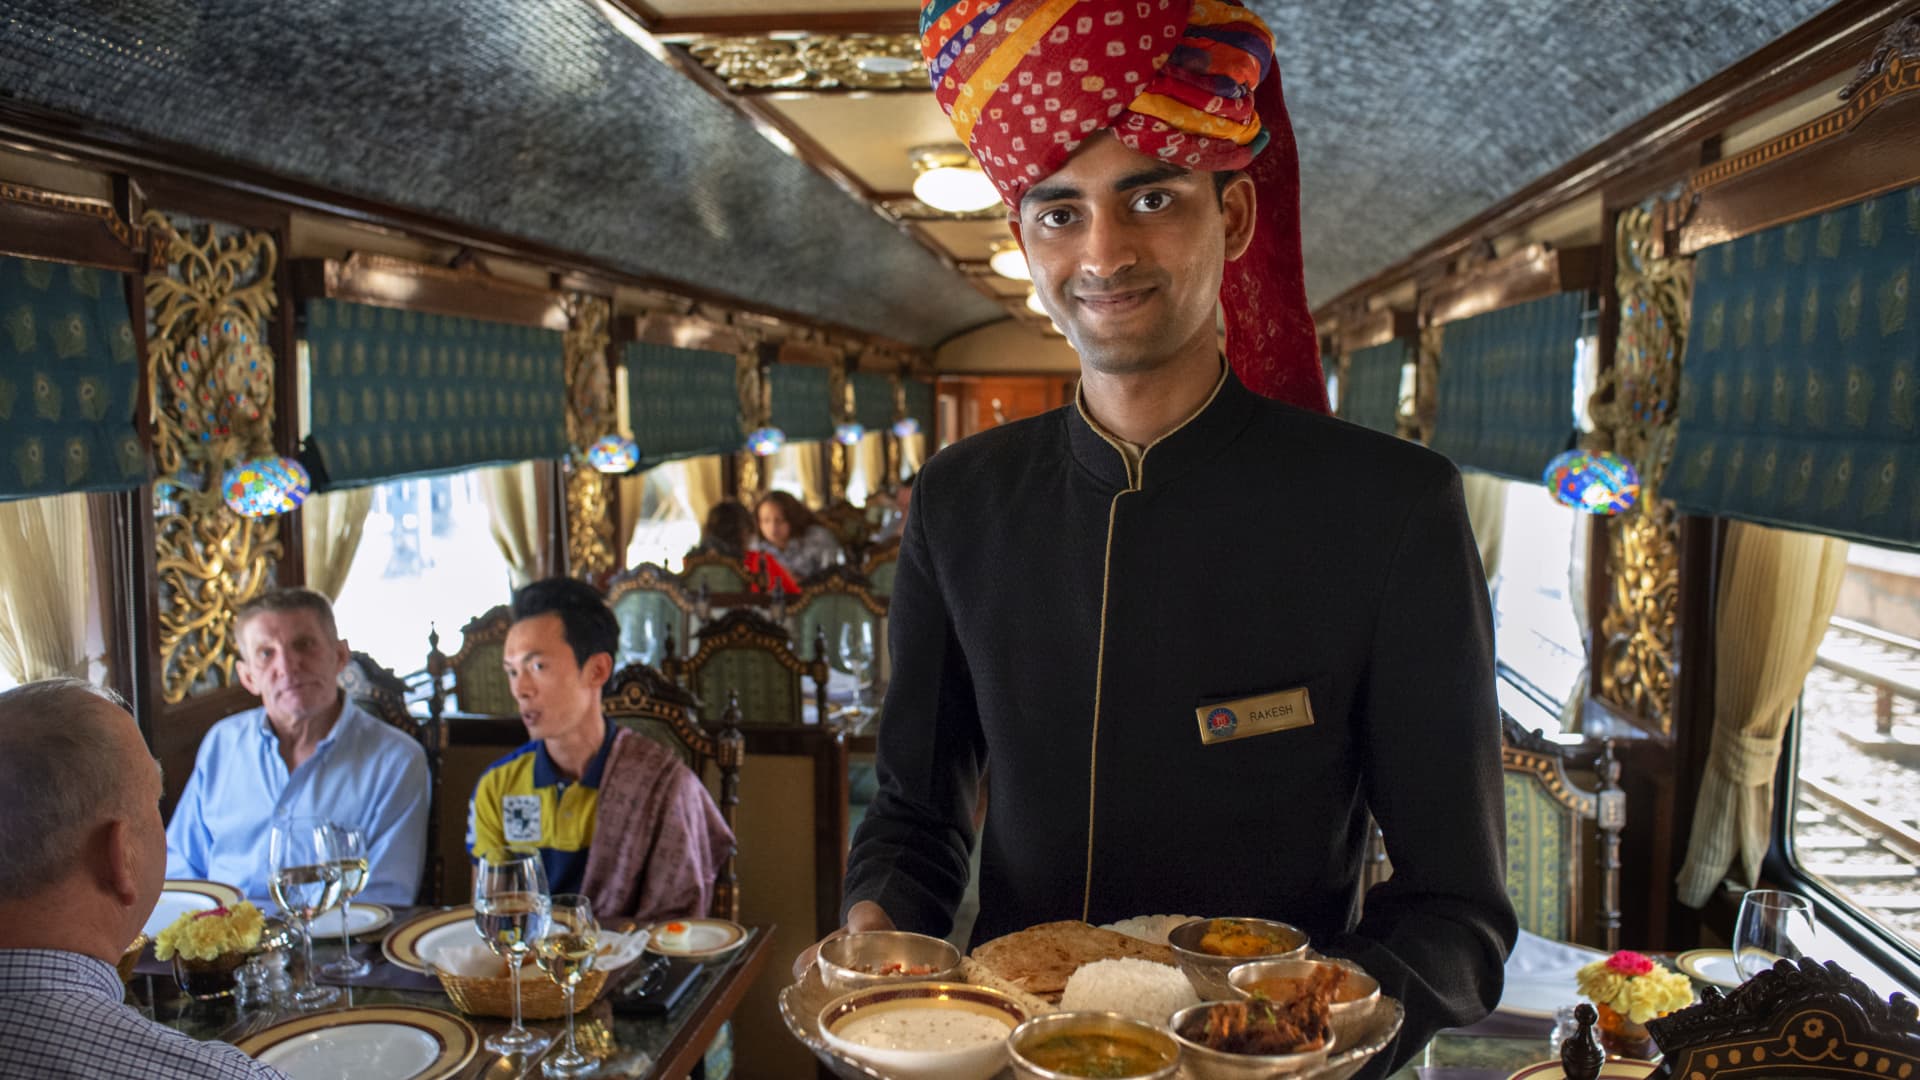 Indian food served in one of the dining cars on board the luxury Maharajas' Express.